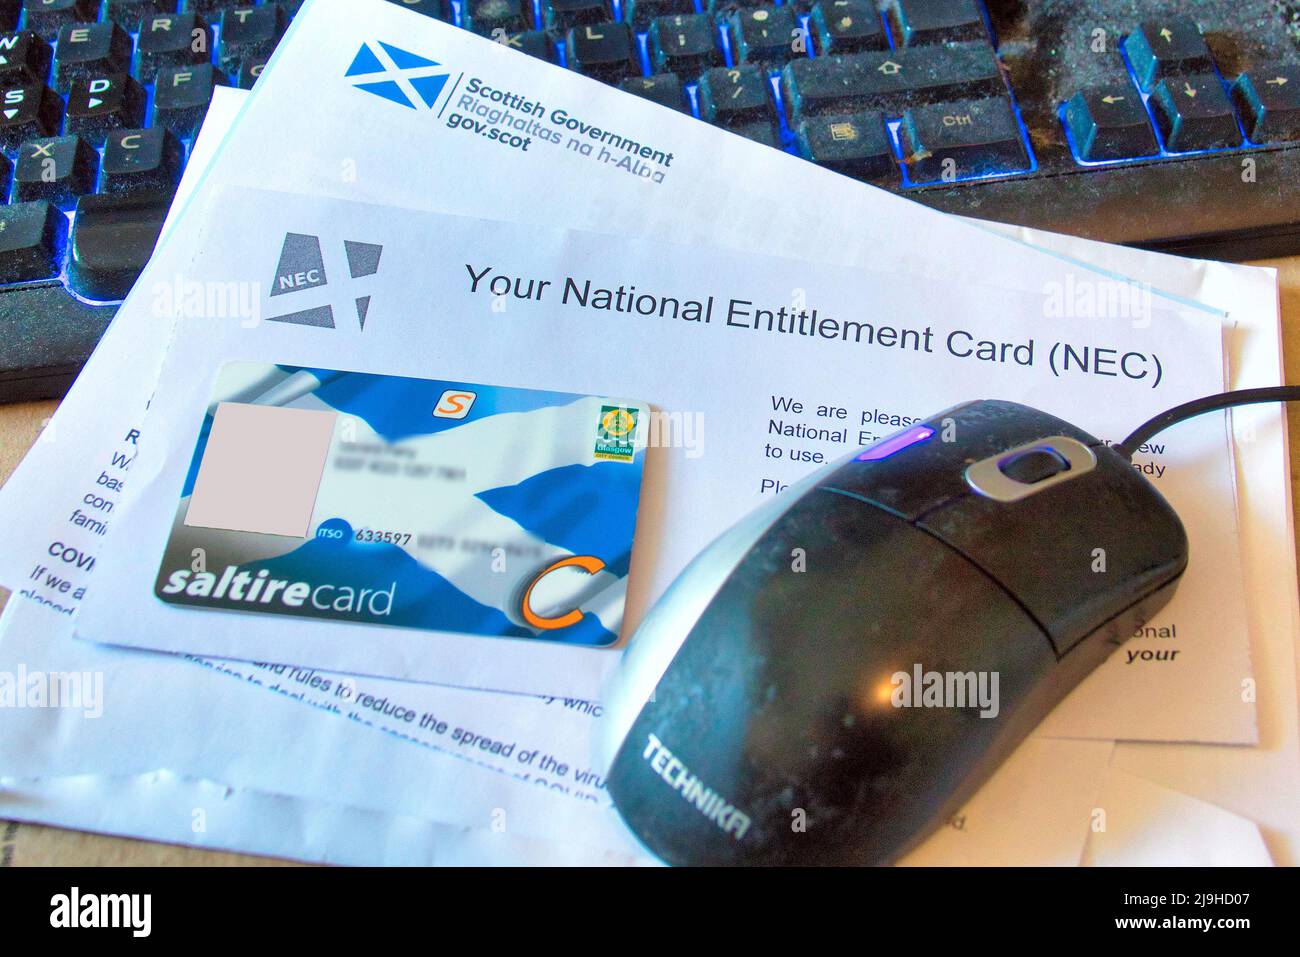 Glasgow, Scotland, UK 23rd  May, 2022. Conceptual representation of current news topic. National Entitlement or saltire card enabling free travel all over Scotland. Credit Gerard Ferry/Alamy Live News Stock Photo